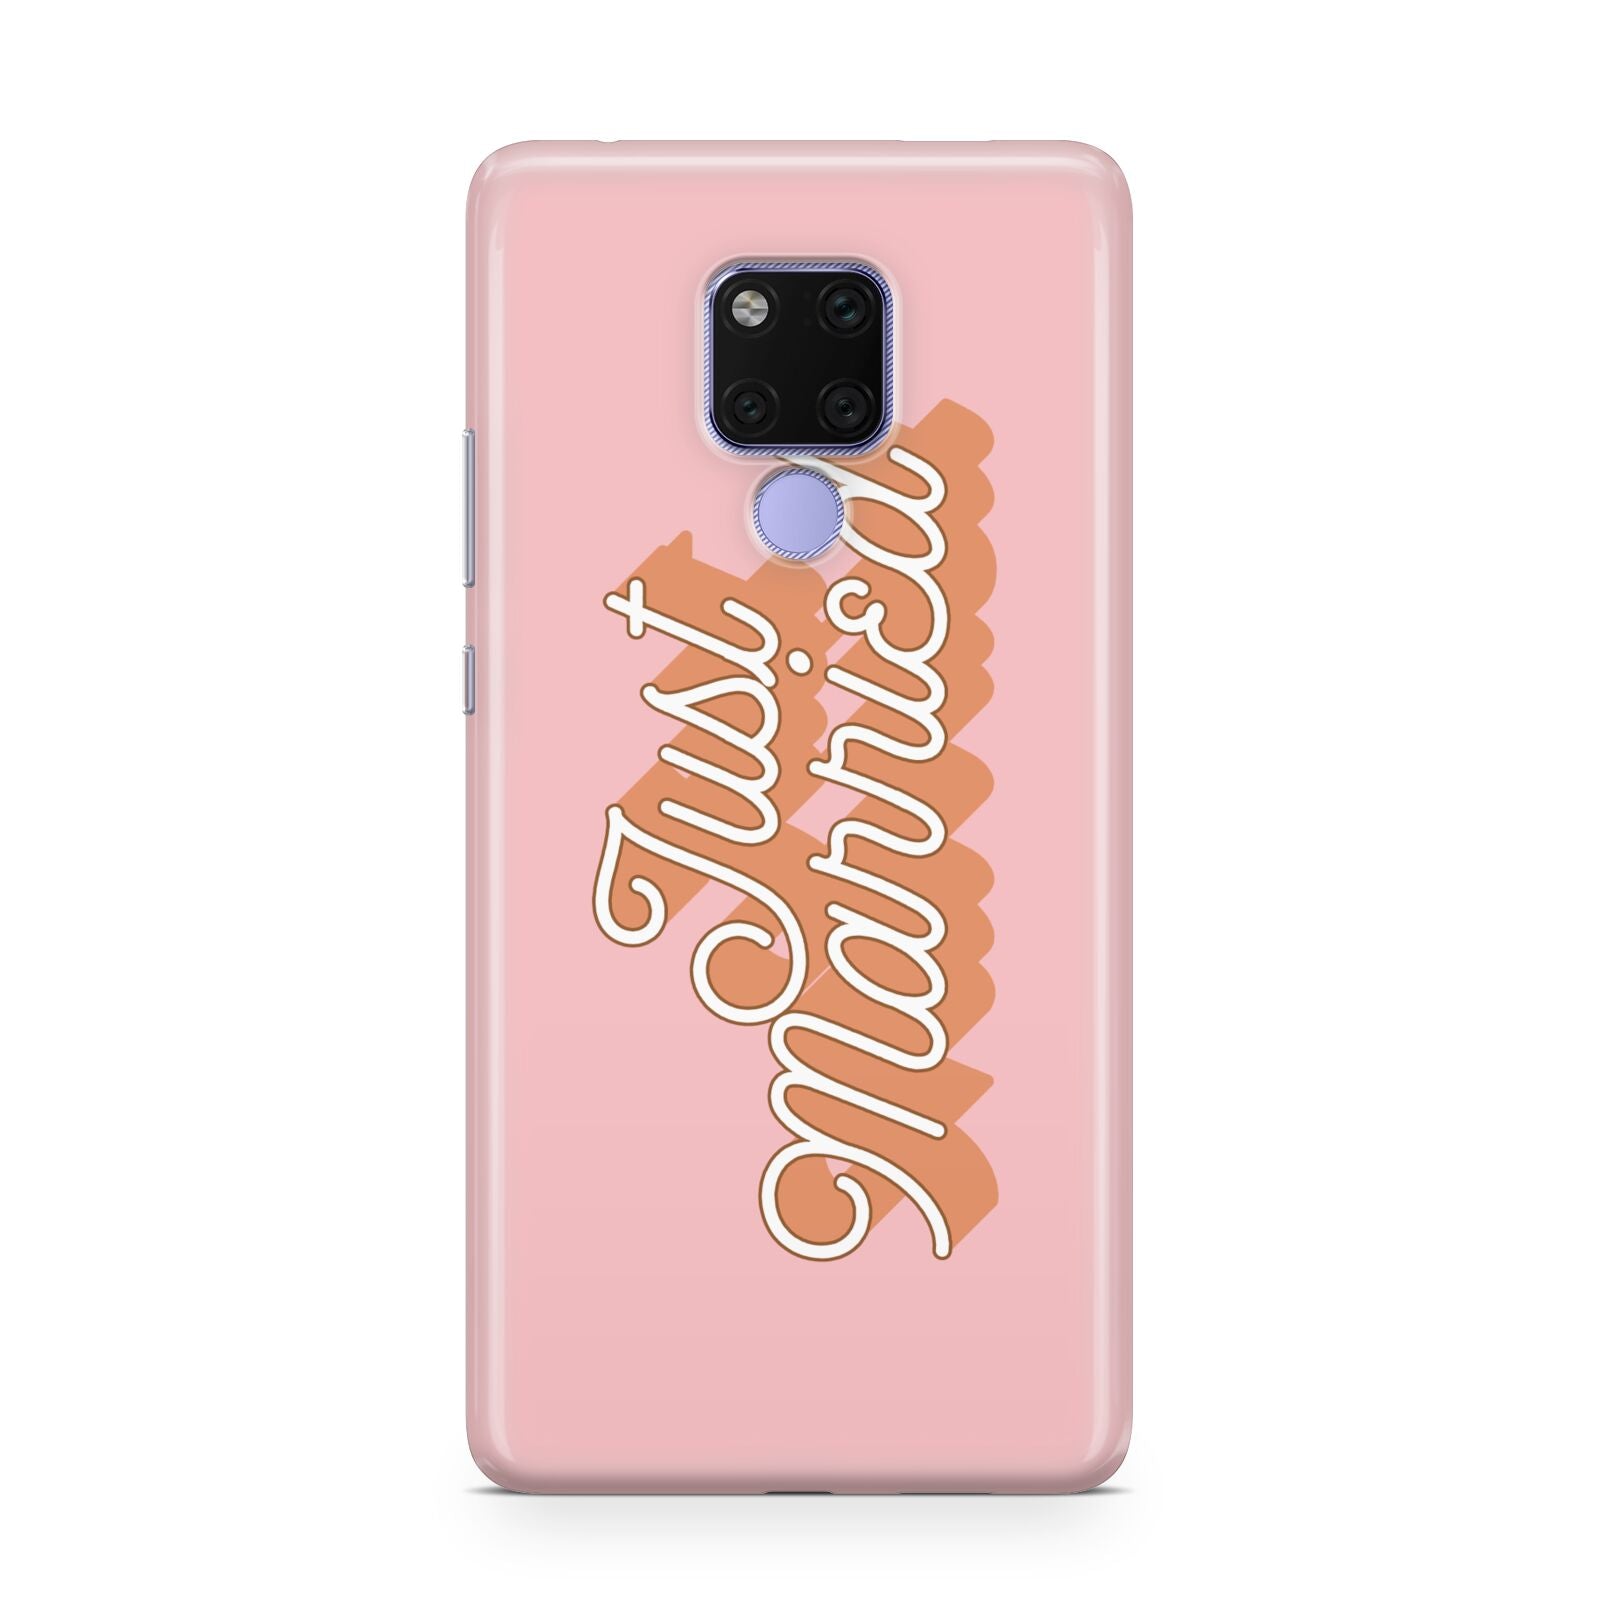 Just Married Pink Huawei Mate 20X Phone Case